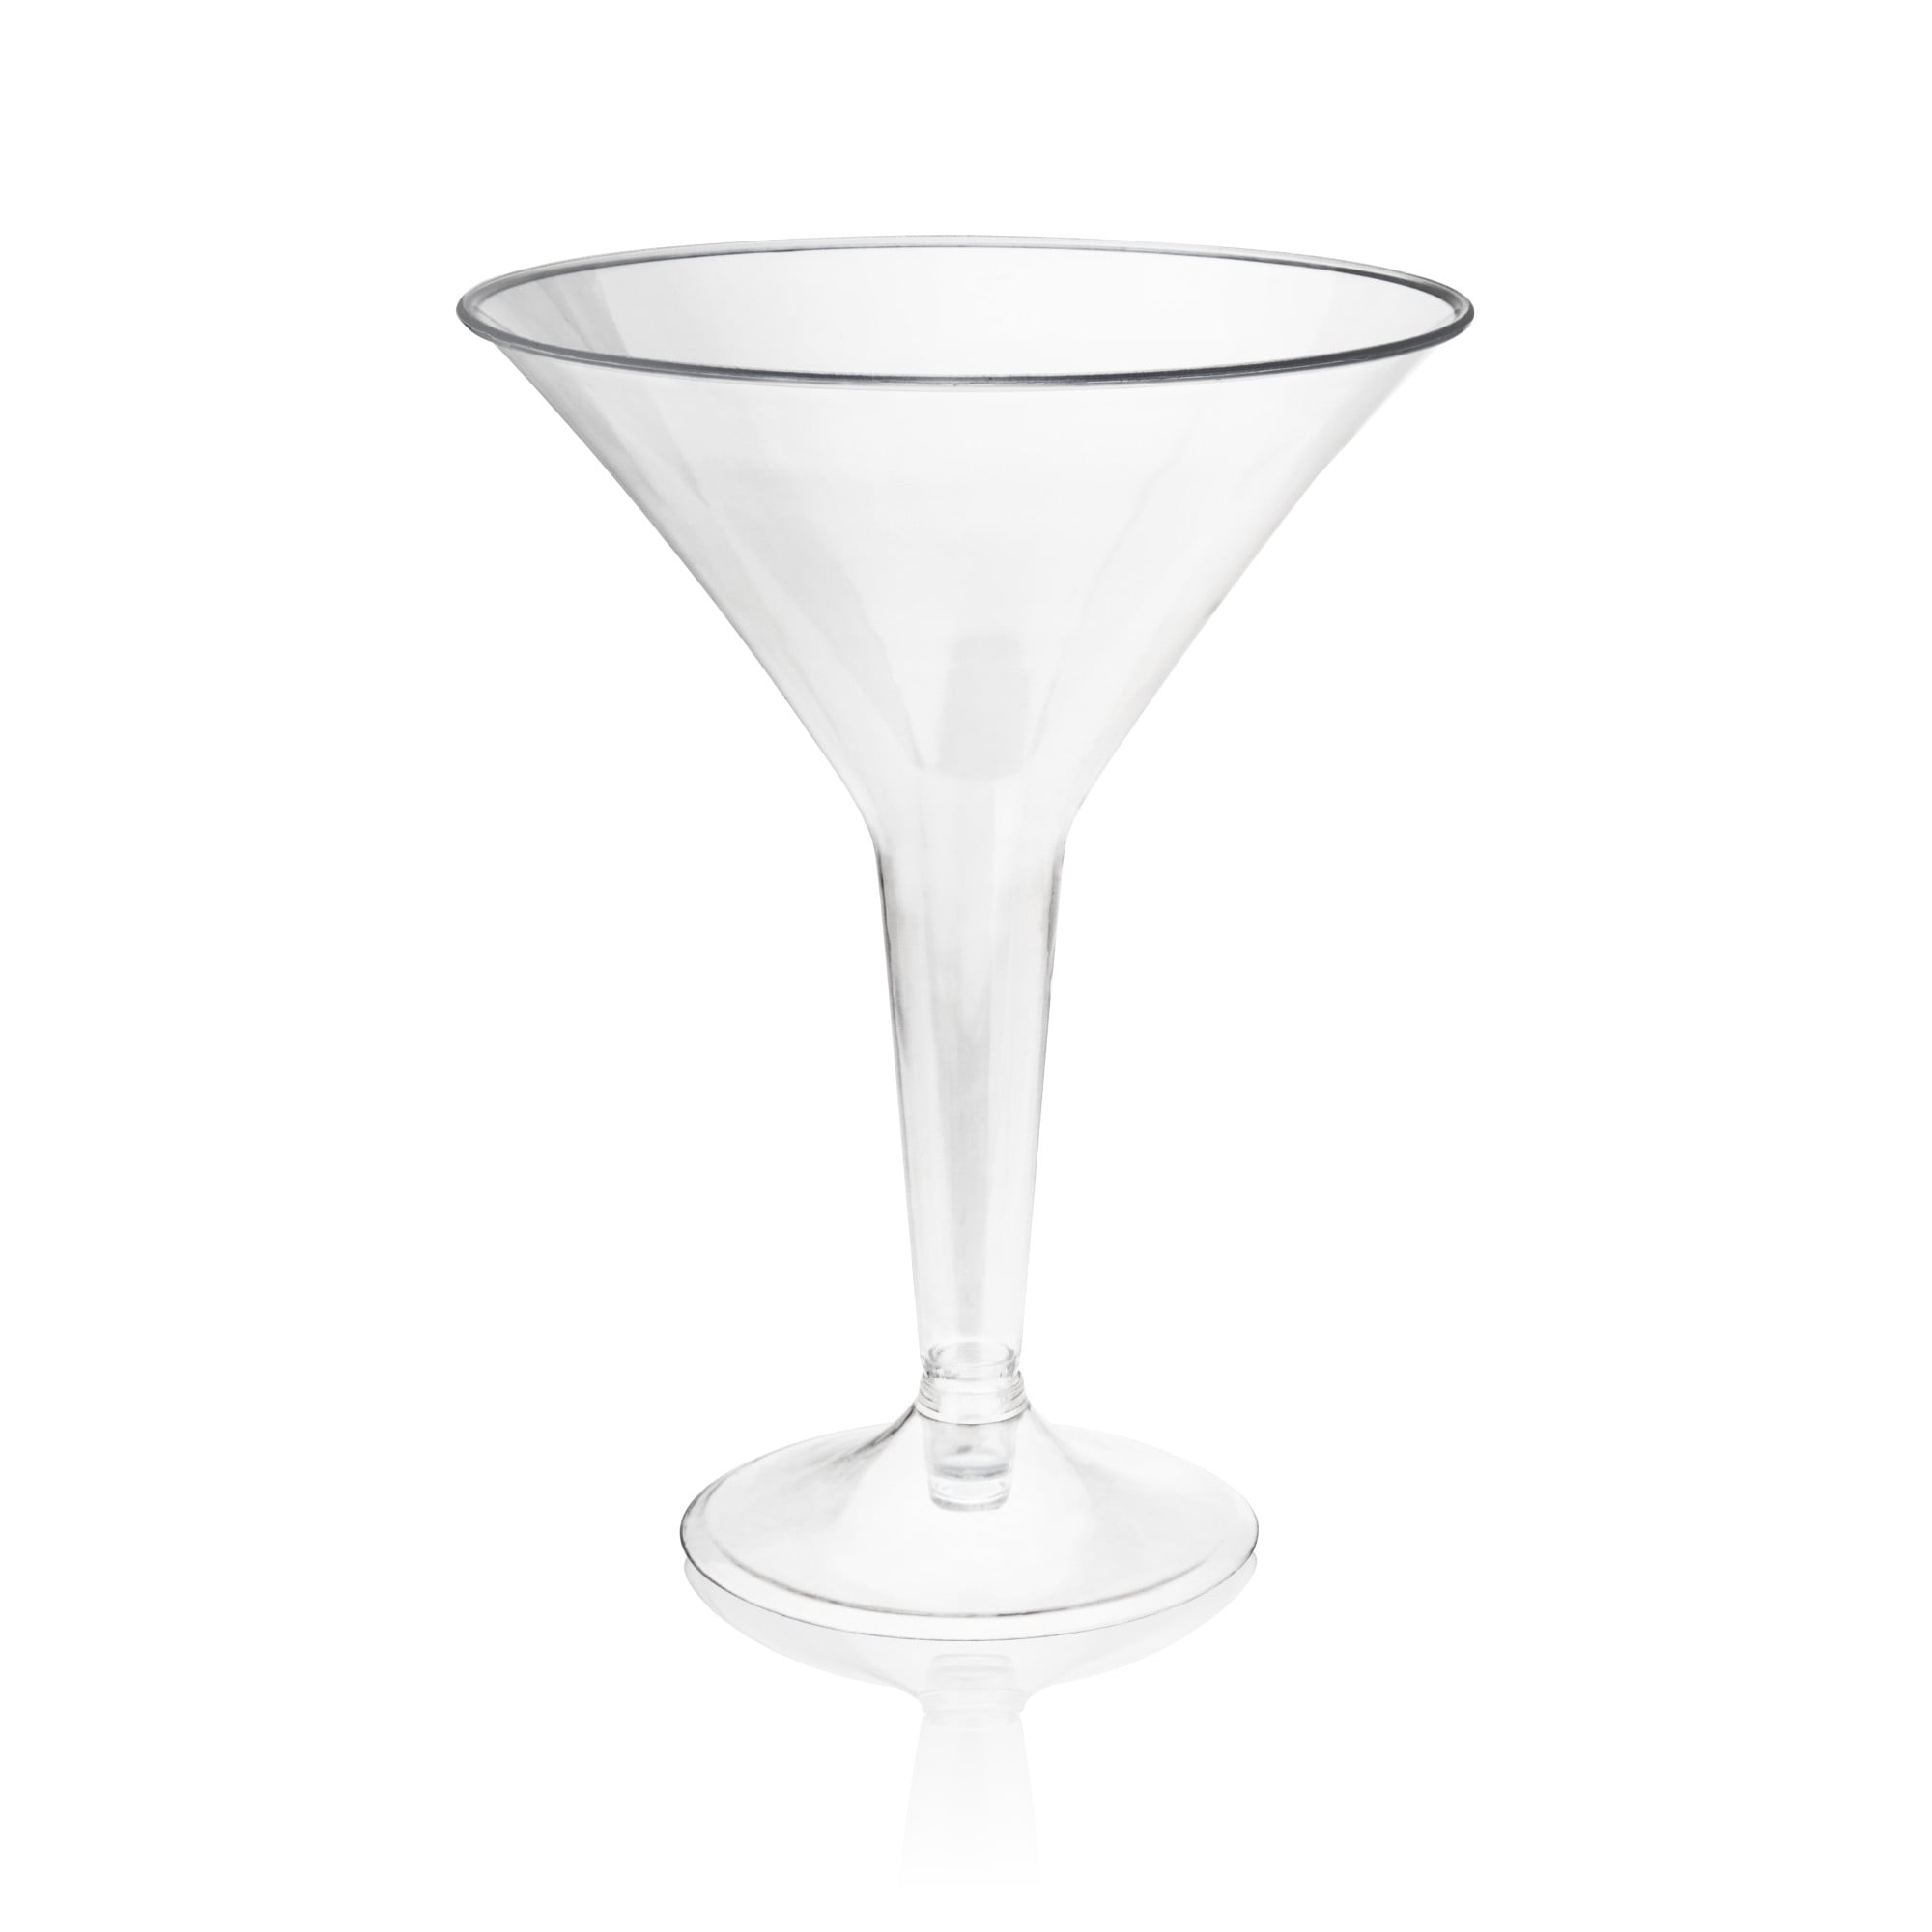 Pink Martini Tumbler 8 Ounce Stainless Steel Margarita Martini Cup 